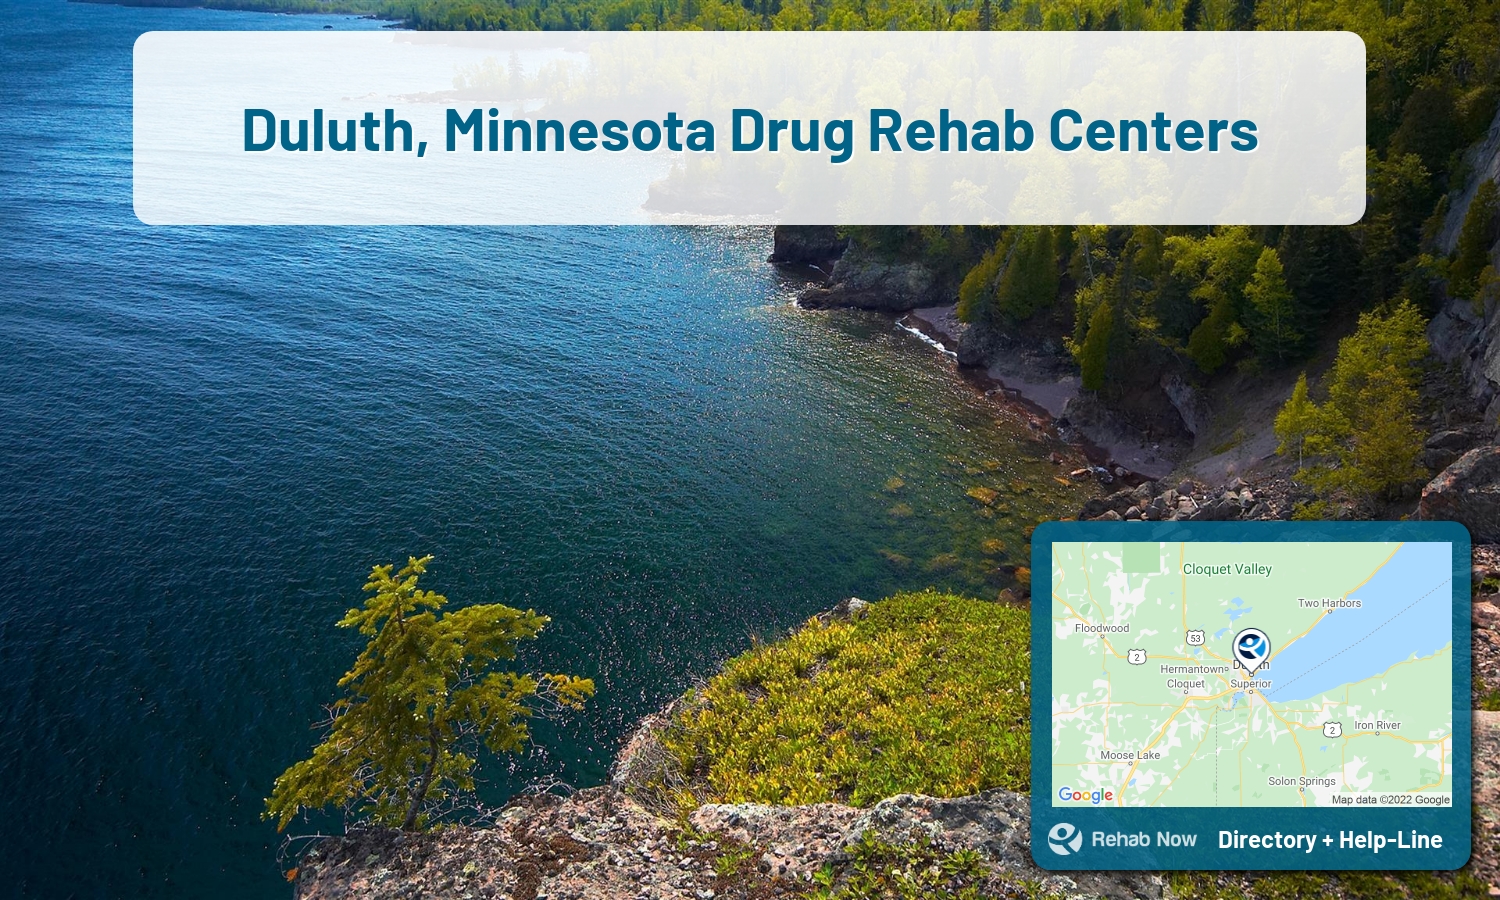 Ready to pick a rehab center in Duluth? Get off alcohol, opiates, and other drugs, by selecting top drug rehab centers in Minnesota